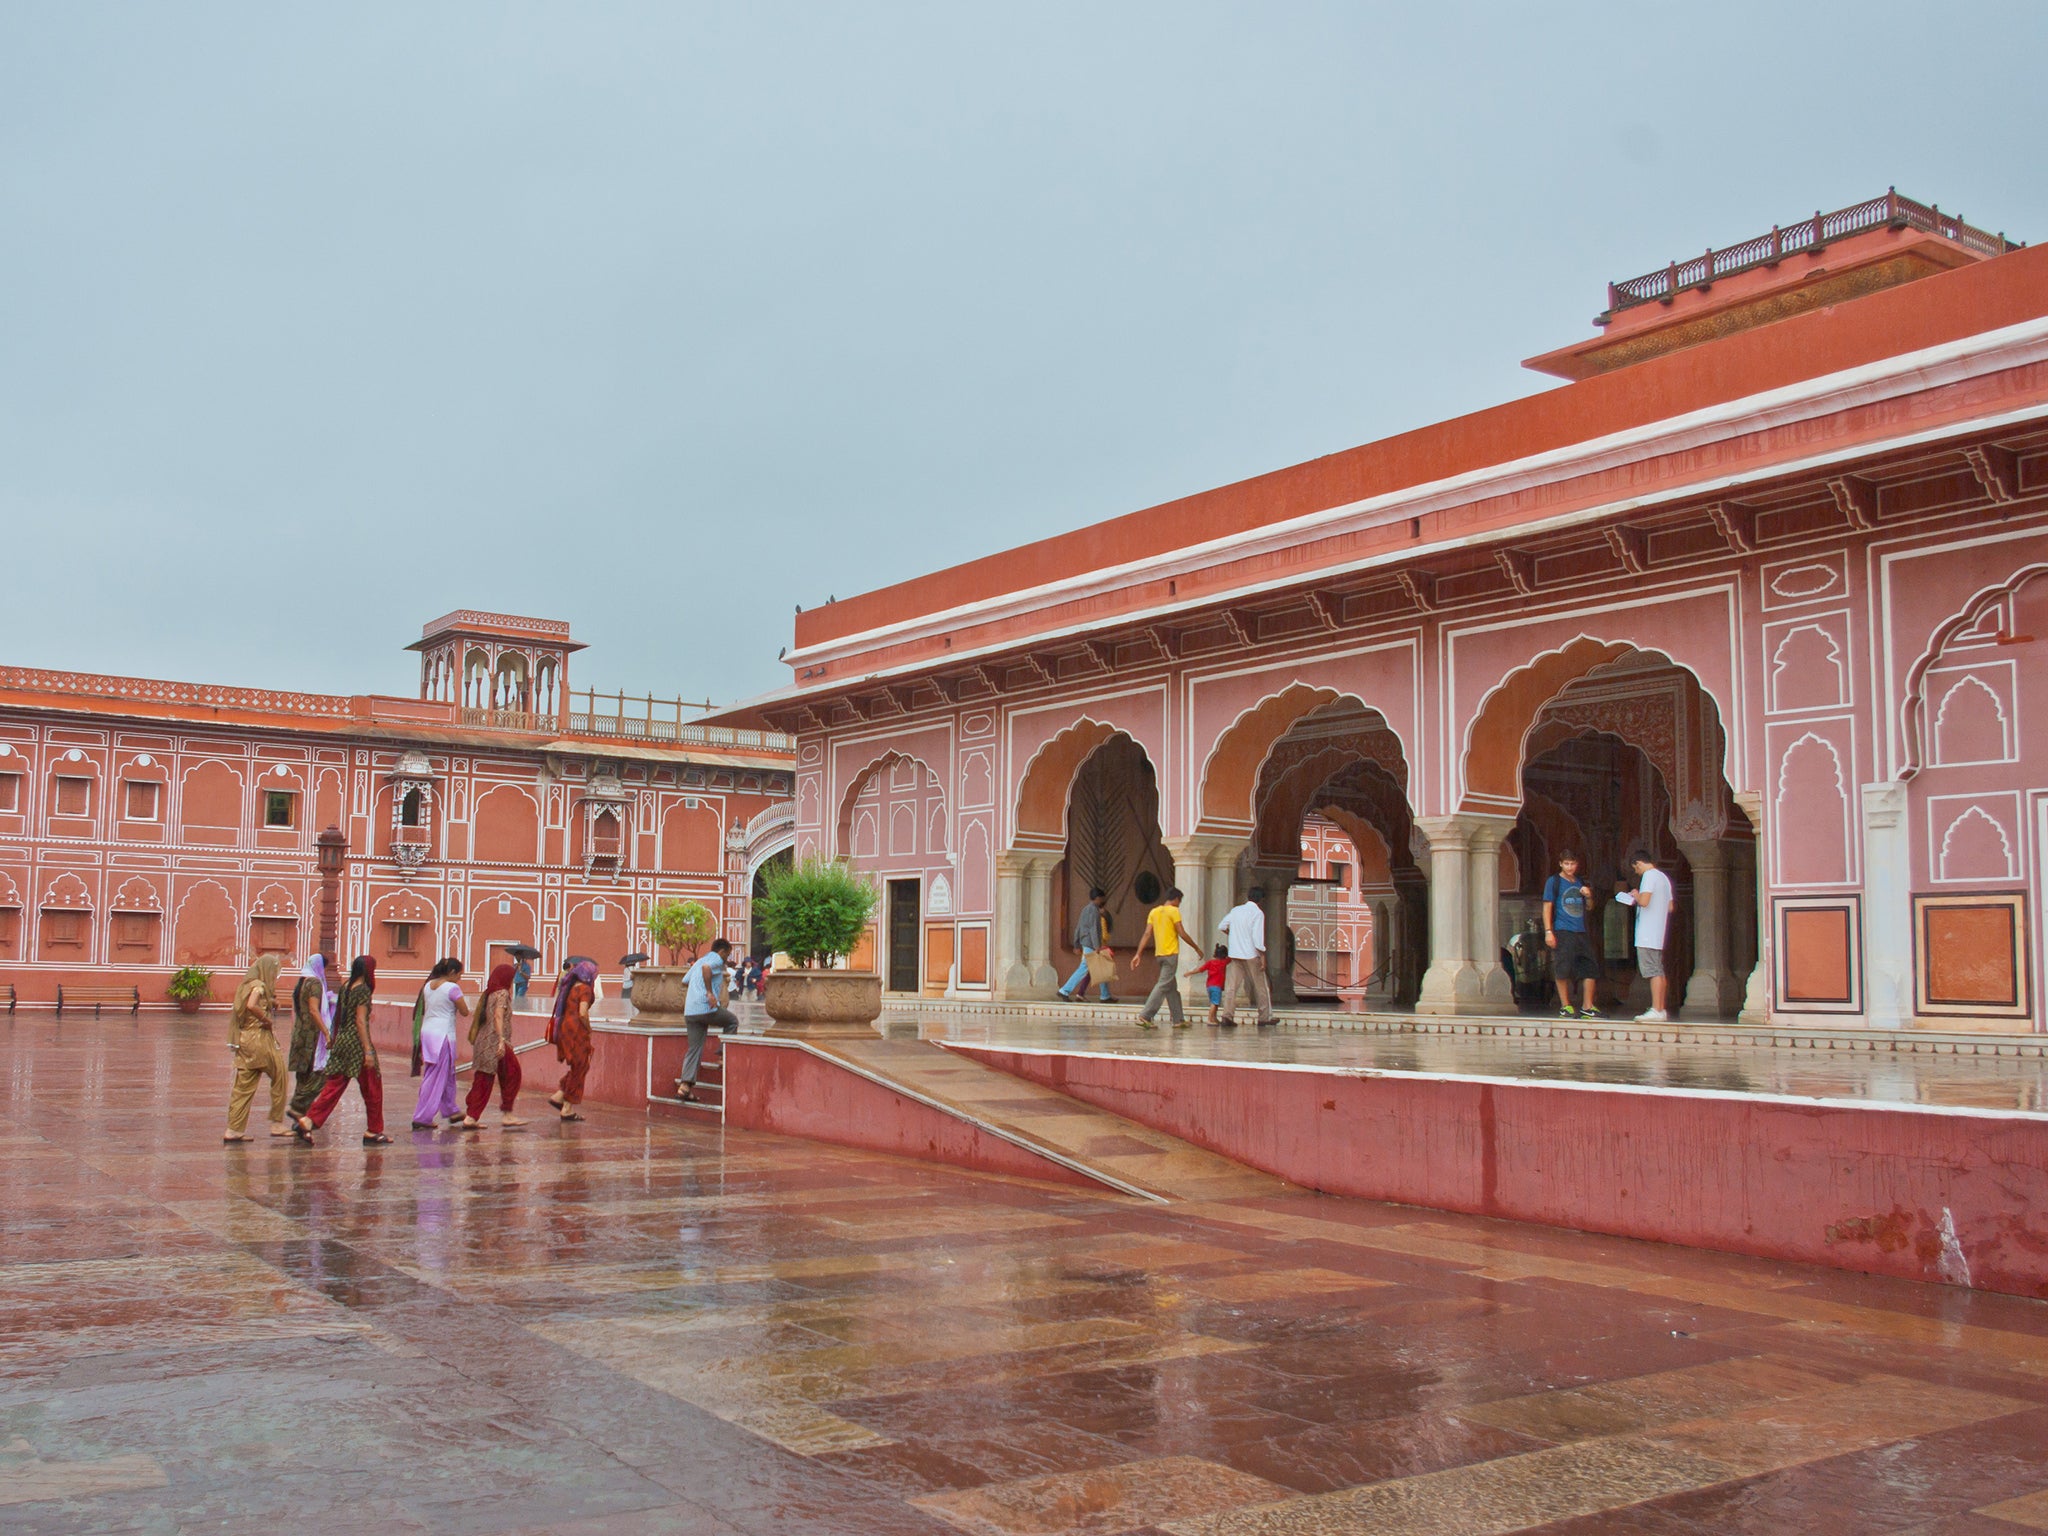 Fondly known as India’s Pink City, Jaipur will awaken all your senses. Feel like a Maharaja and relive the culture and regal history from bazaars to temples